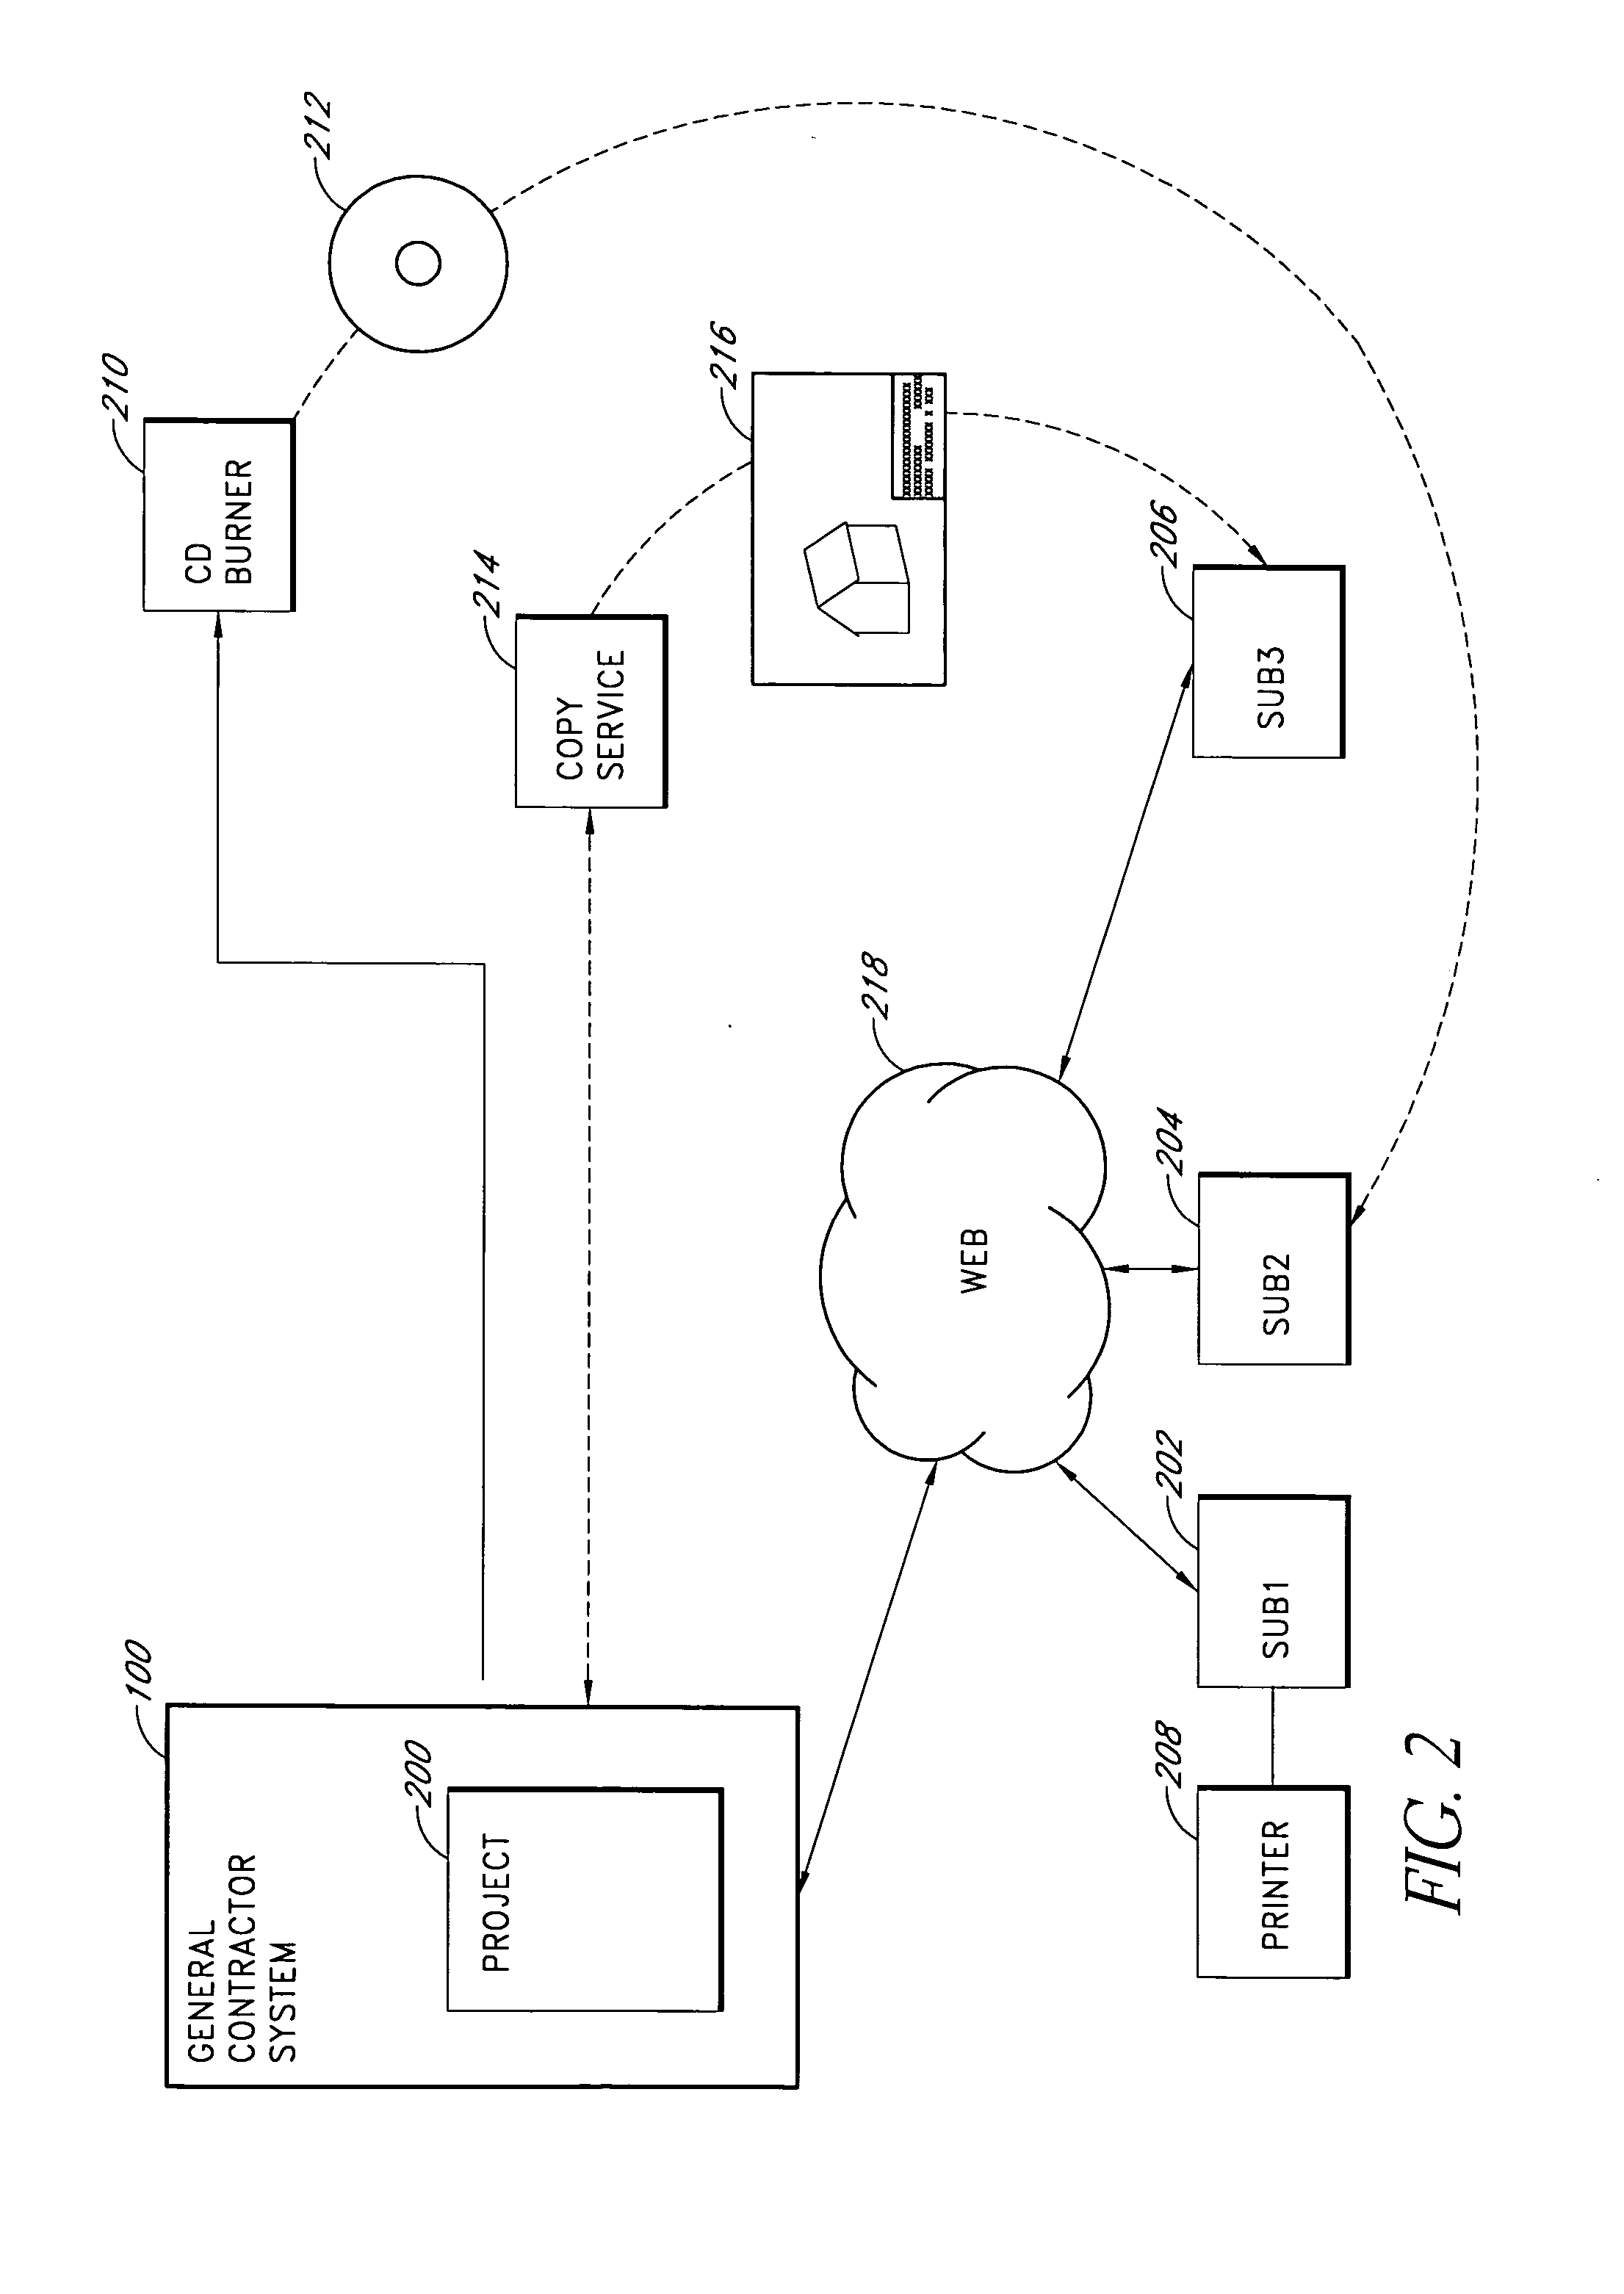 System and method of managing documents over a computer network